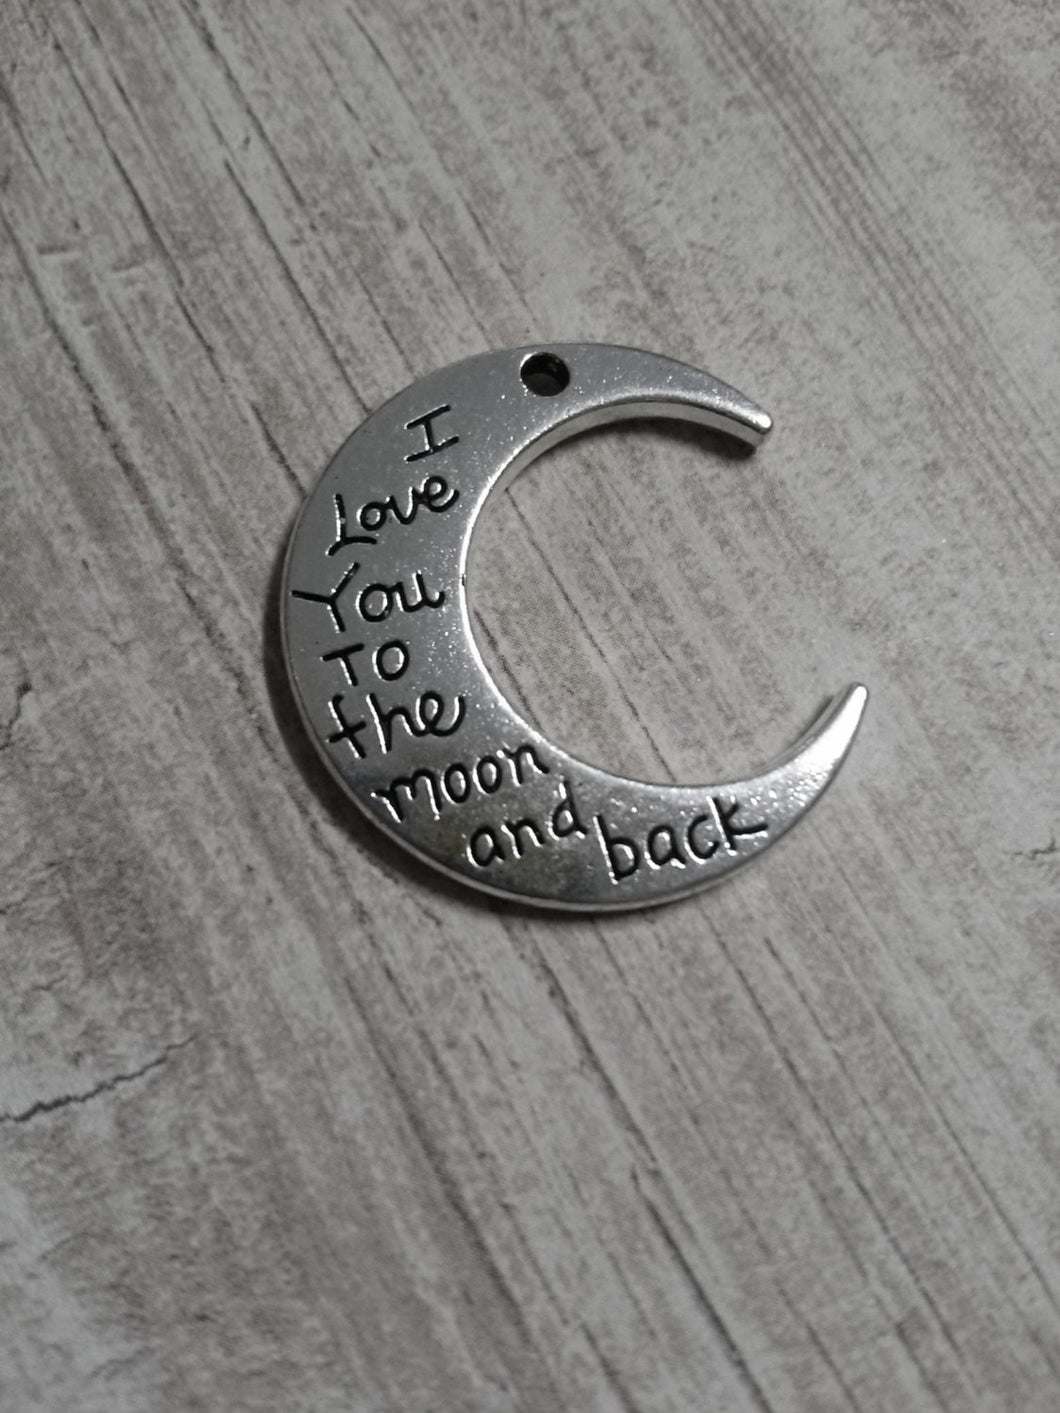 Moon Pendants Crescent Moon Charms Quote Pendants Antiqued Silver Word Charms I Love You To The Moon and Back 4 pieces 2 sided PREORDER